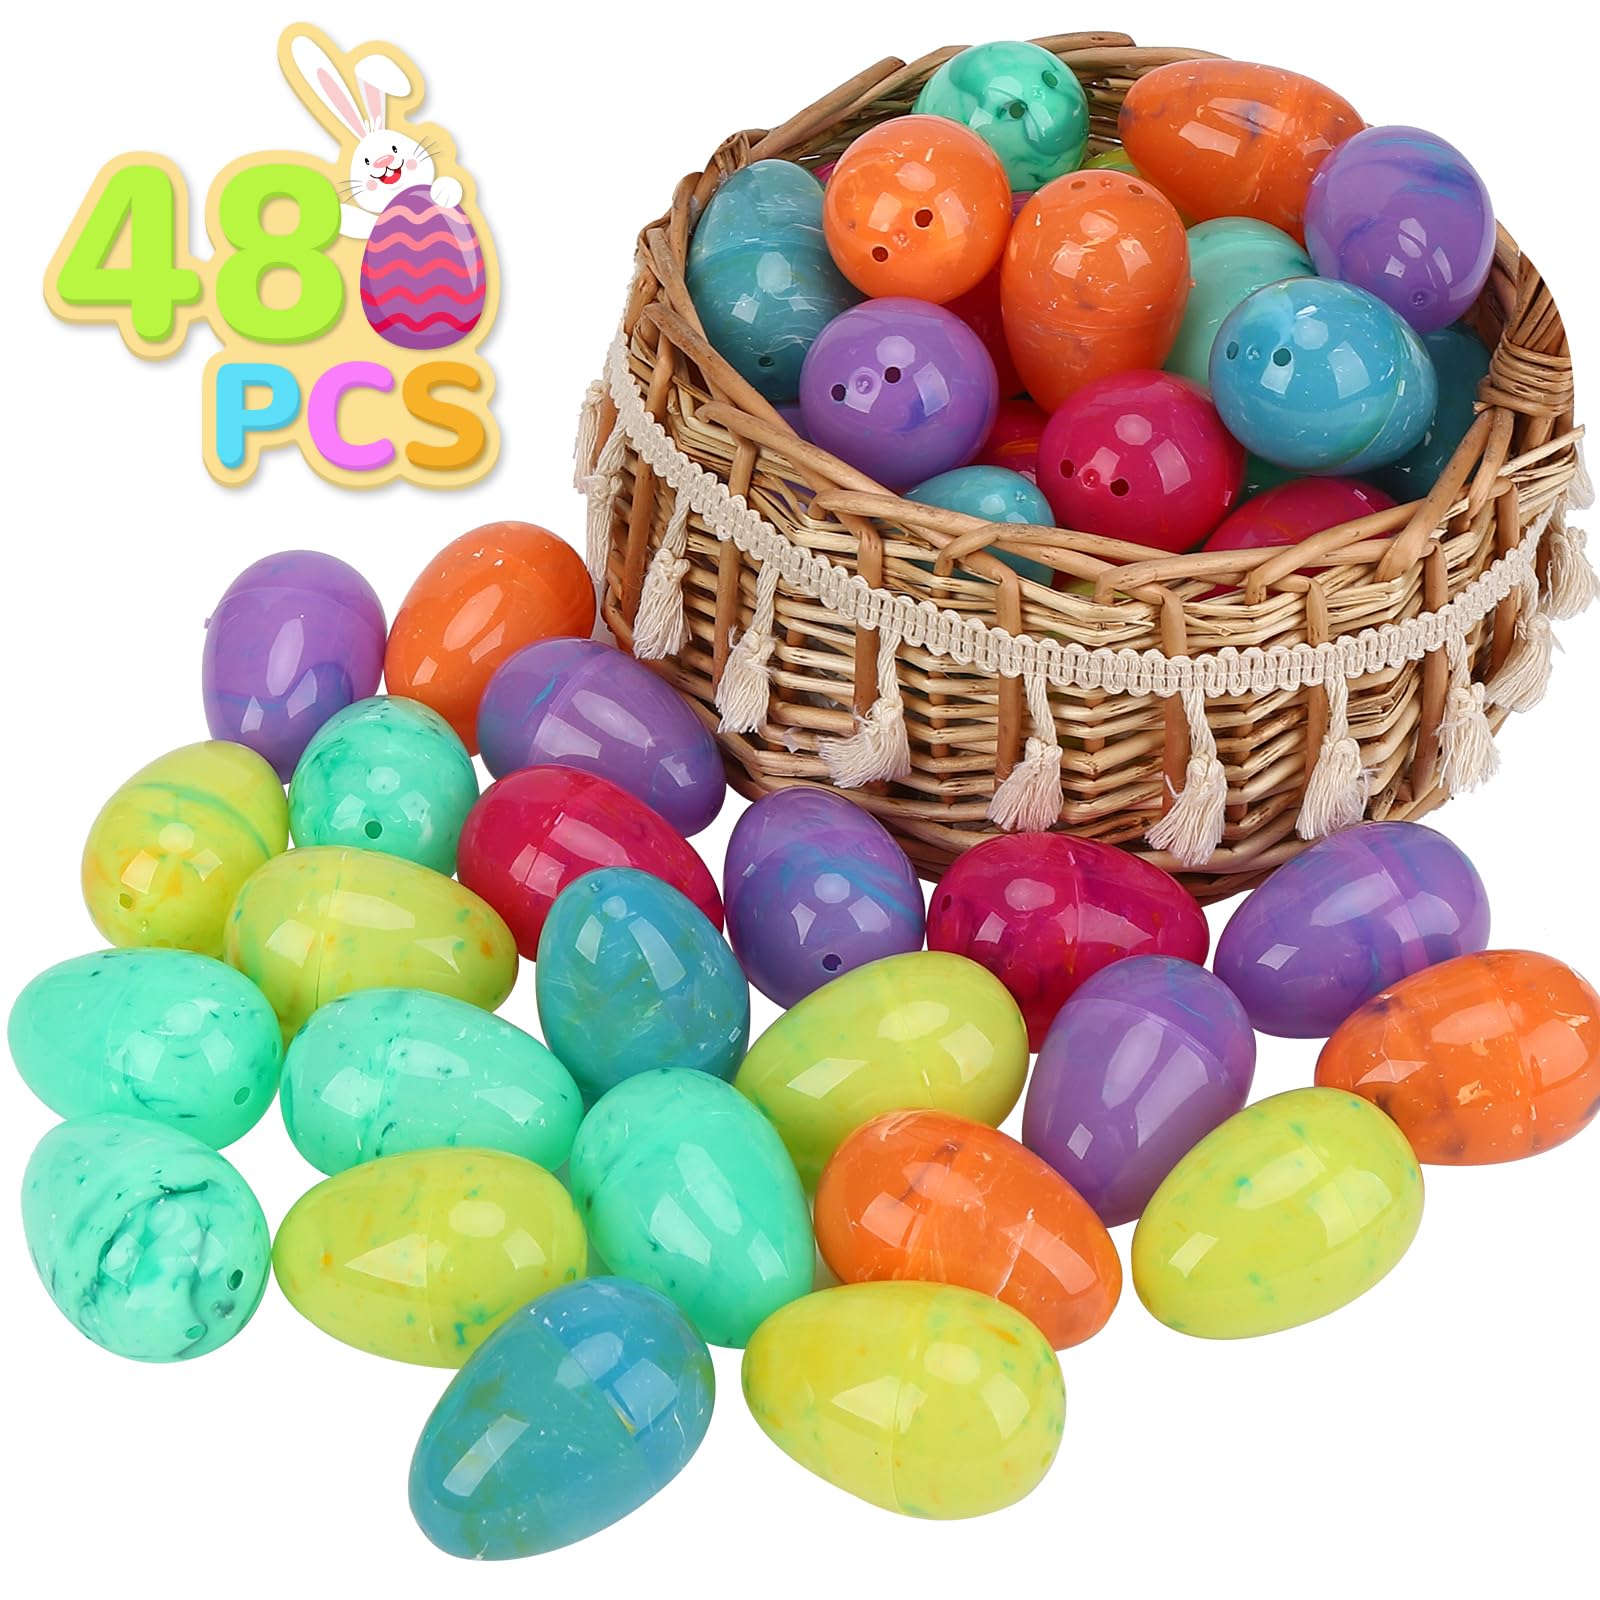 48pcs Easter Printed Plastic Marble Eggs Basket Stuffer for Easter Egg Hunt Event, Party Favor Goodie Bags, Scene and Decoration, School Party Favor Packs and Classroom Rewards (Marbled Eggs)